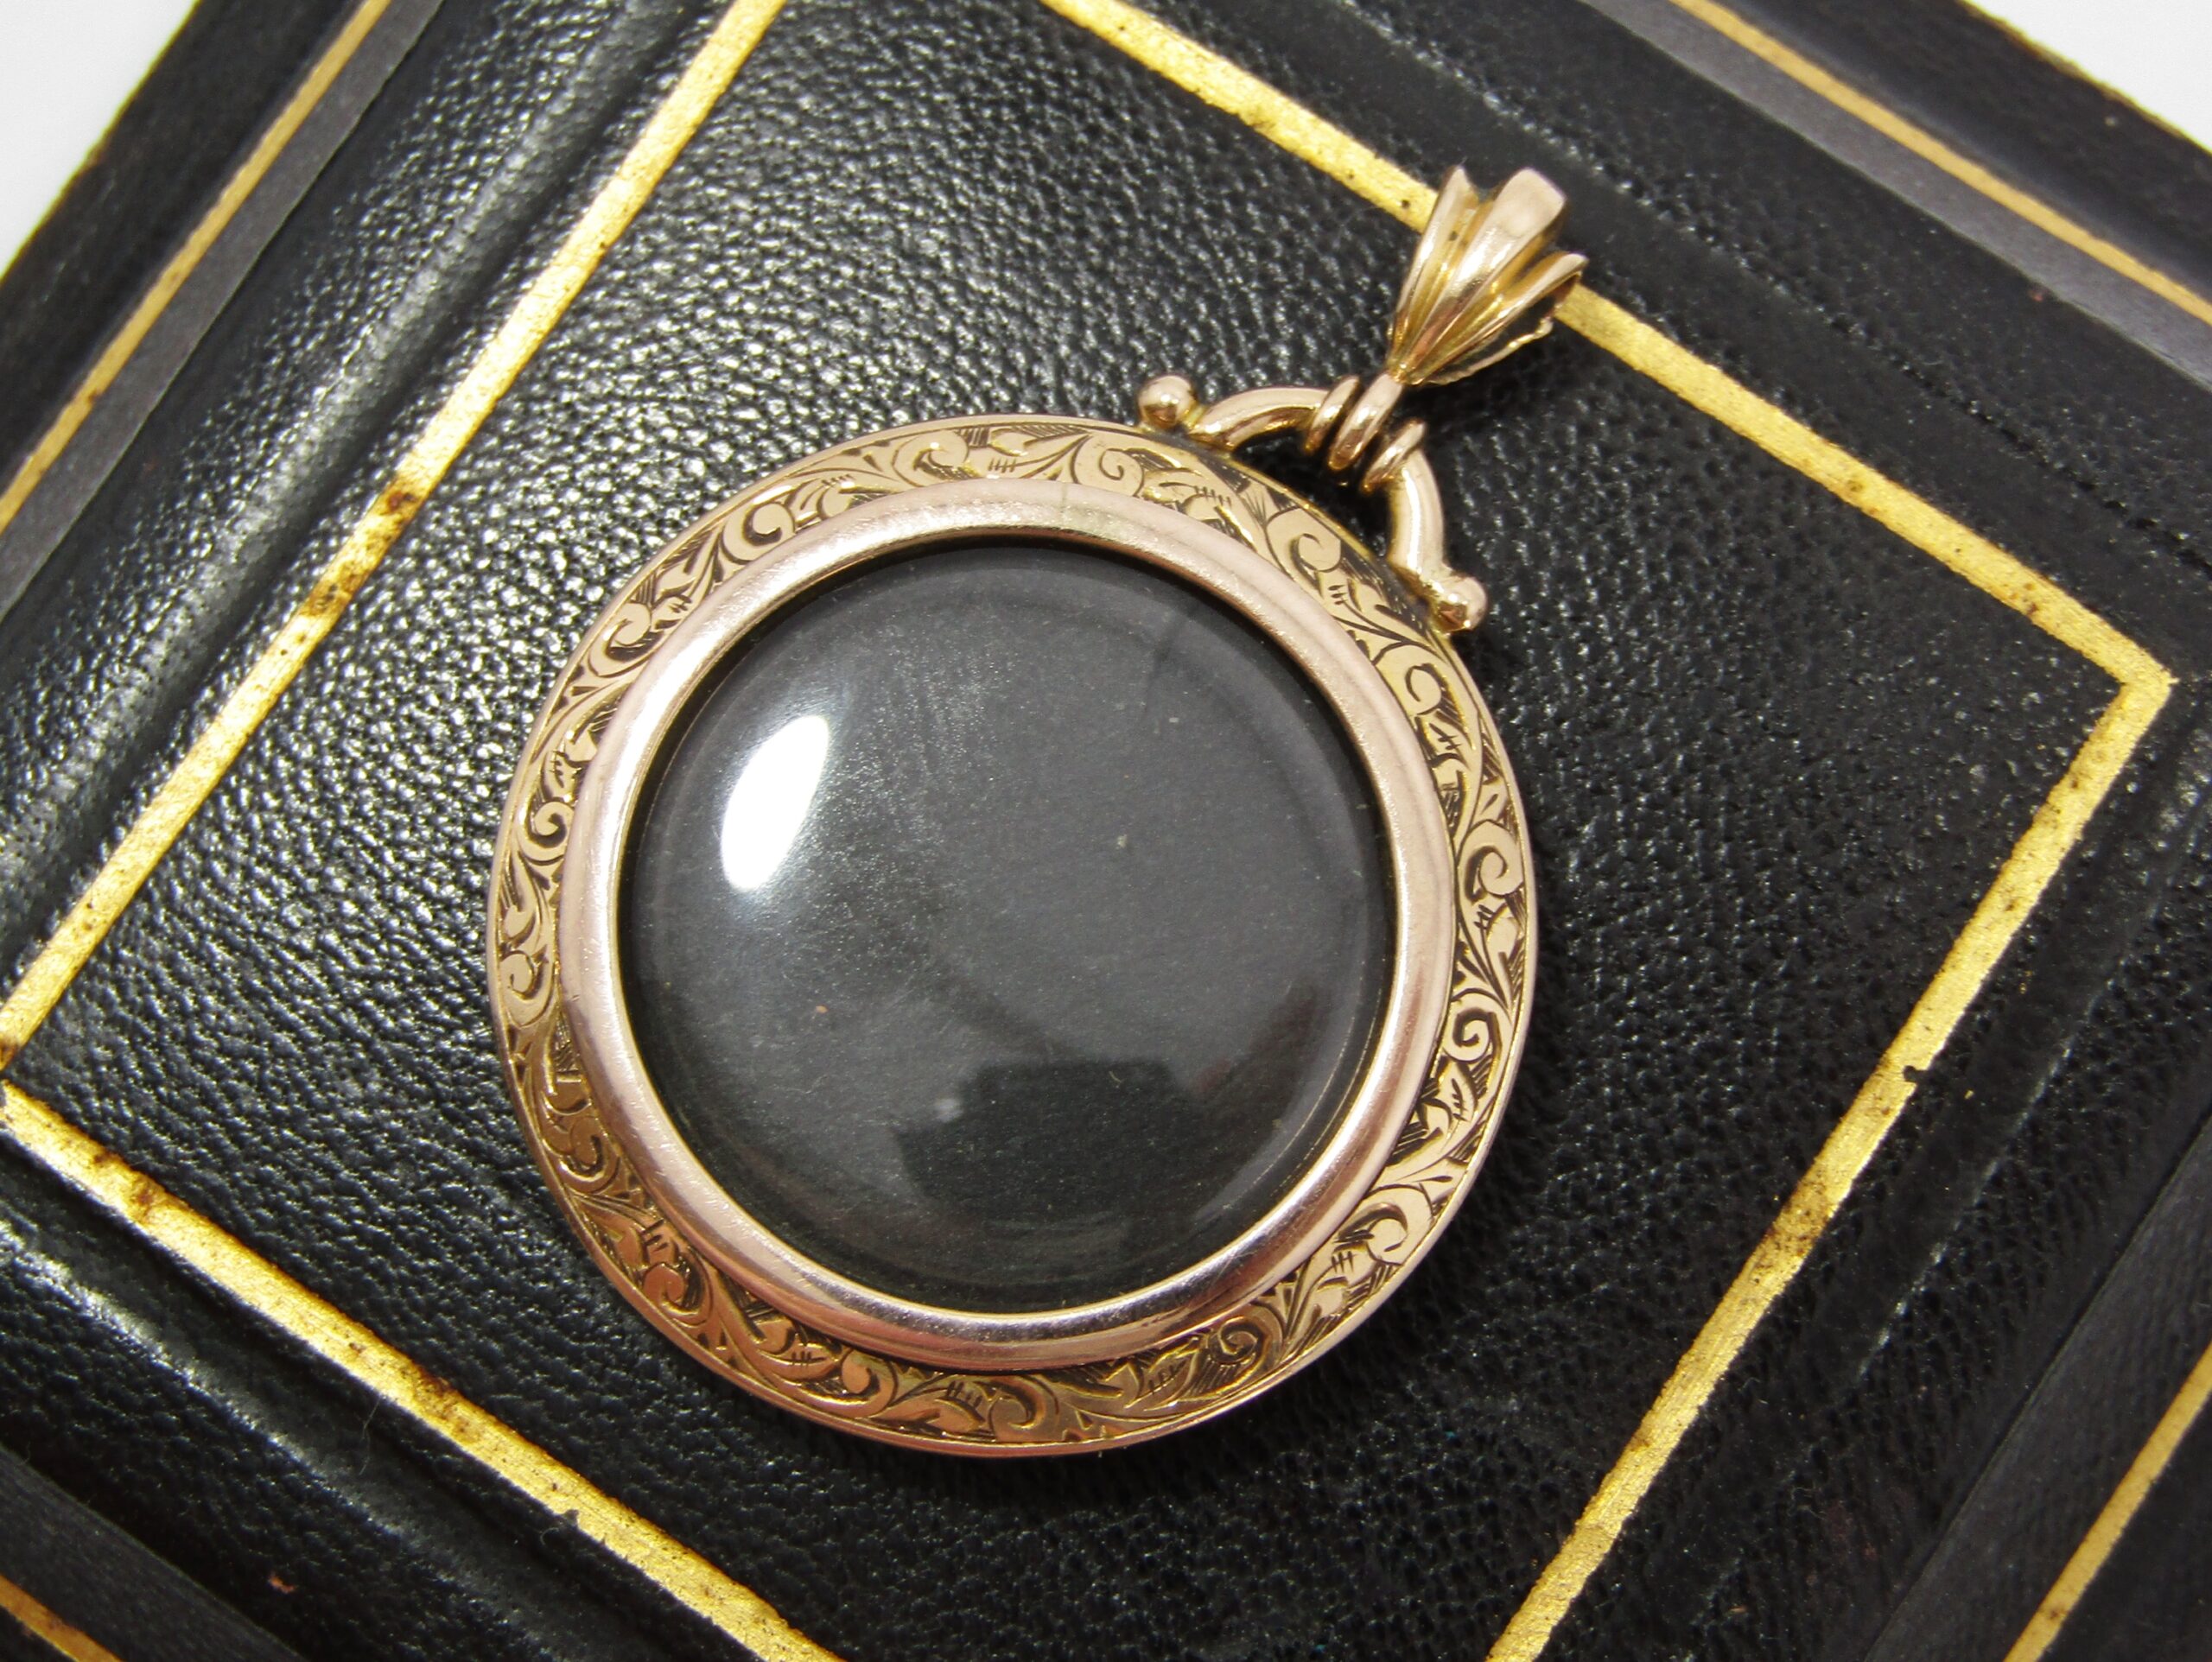 A beautiful, antique 15 carat gold pendant with double-sided photo window